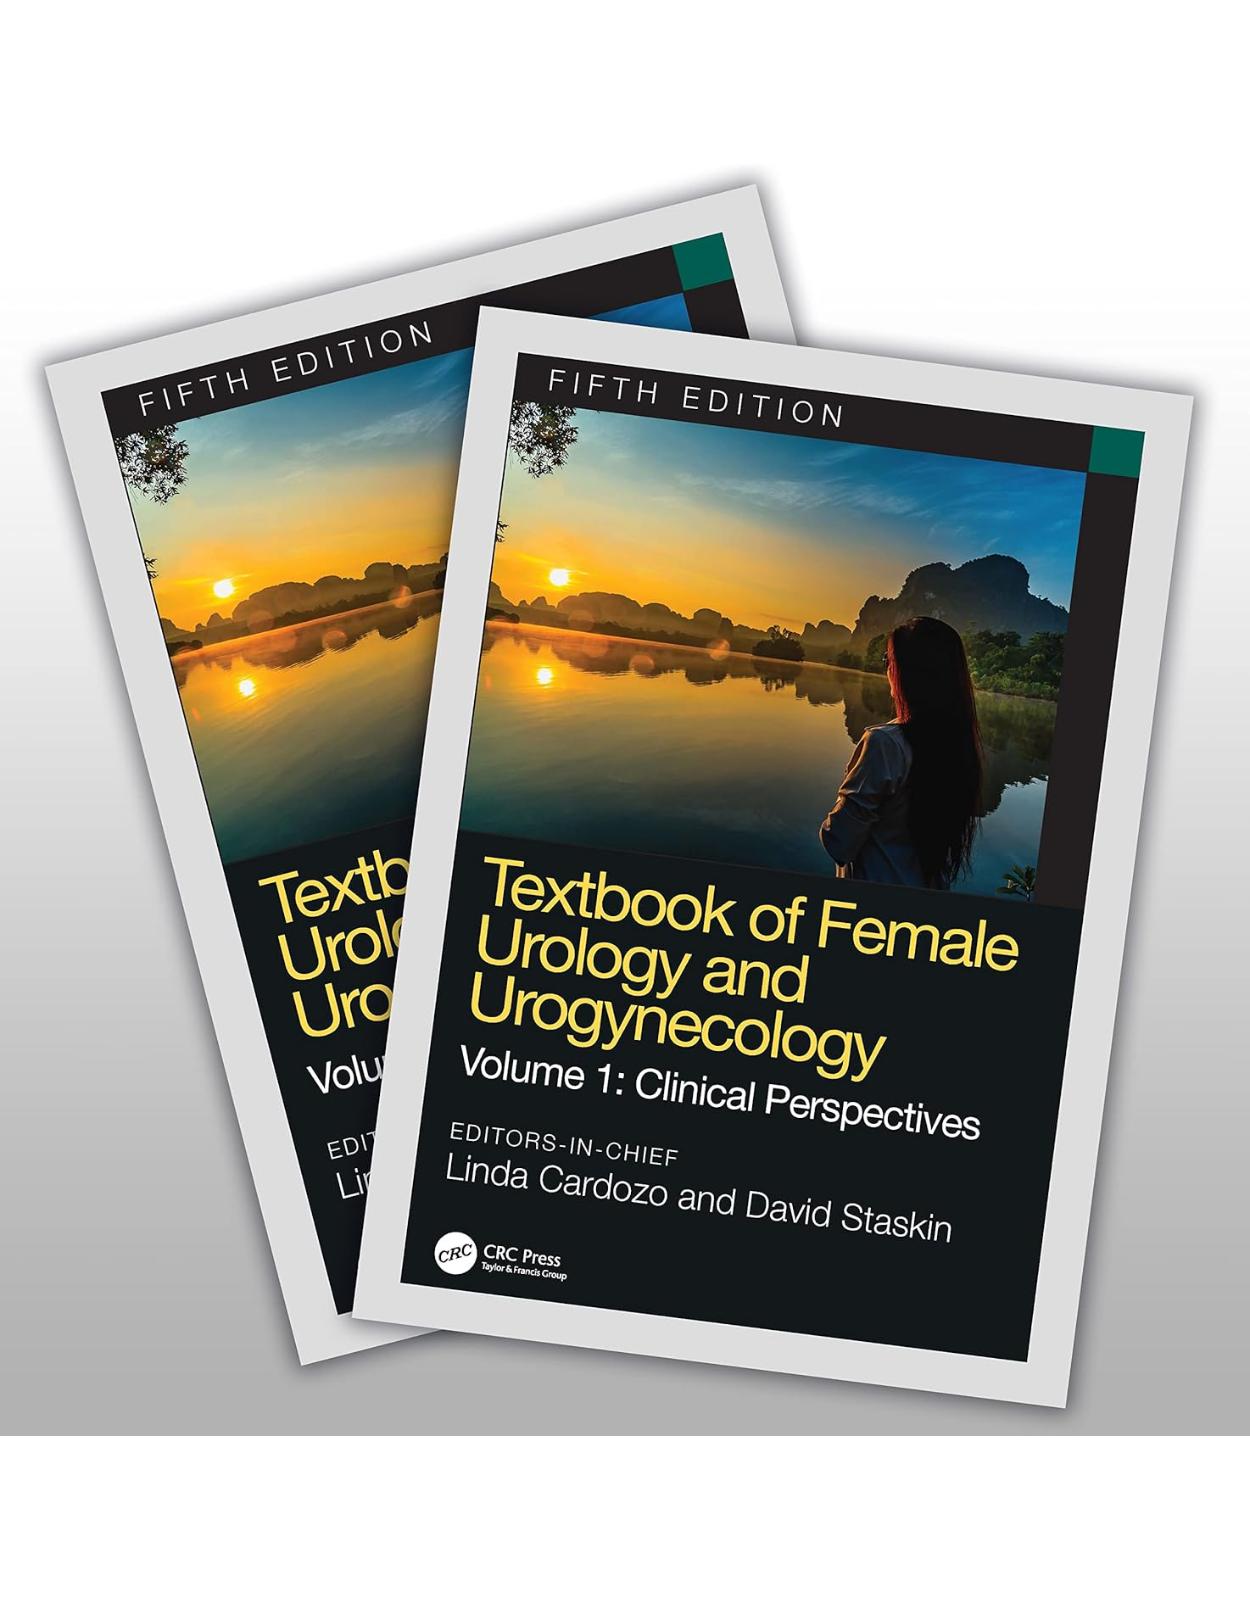 Textbook of Female Urology and Urogynecology: Two-Volume Set